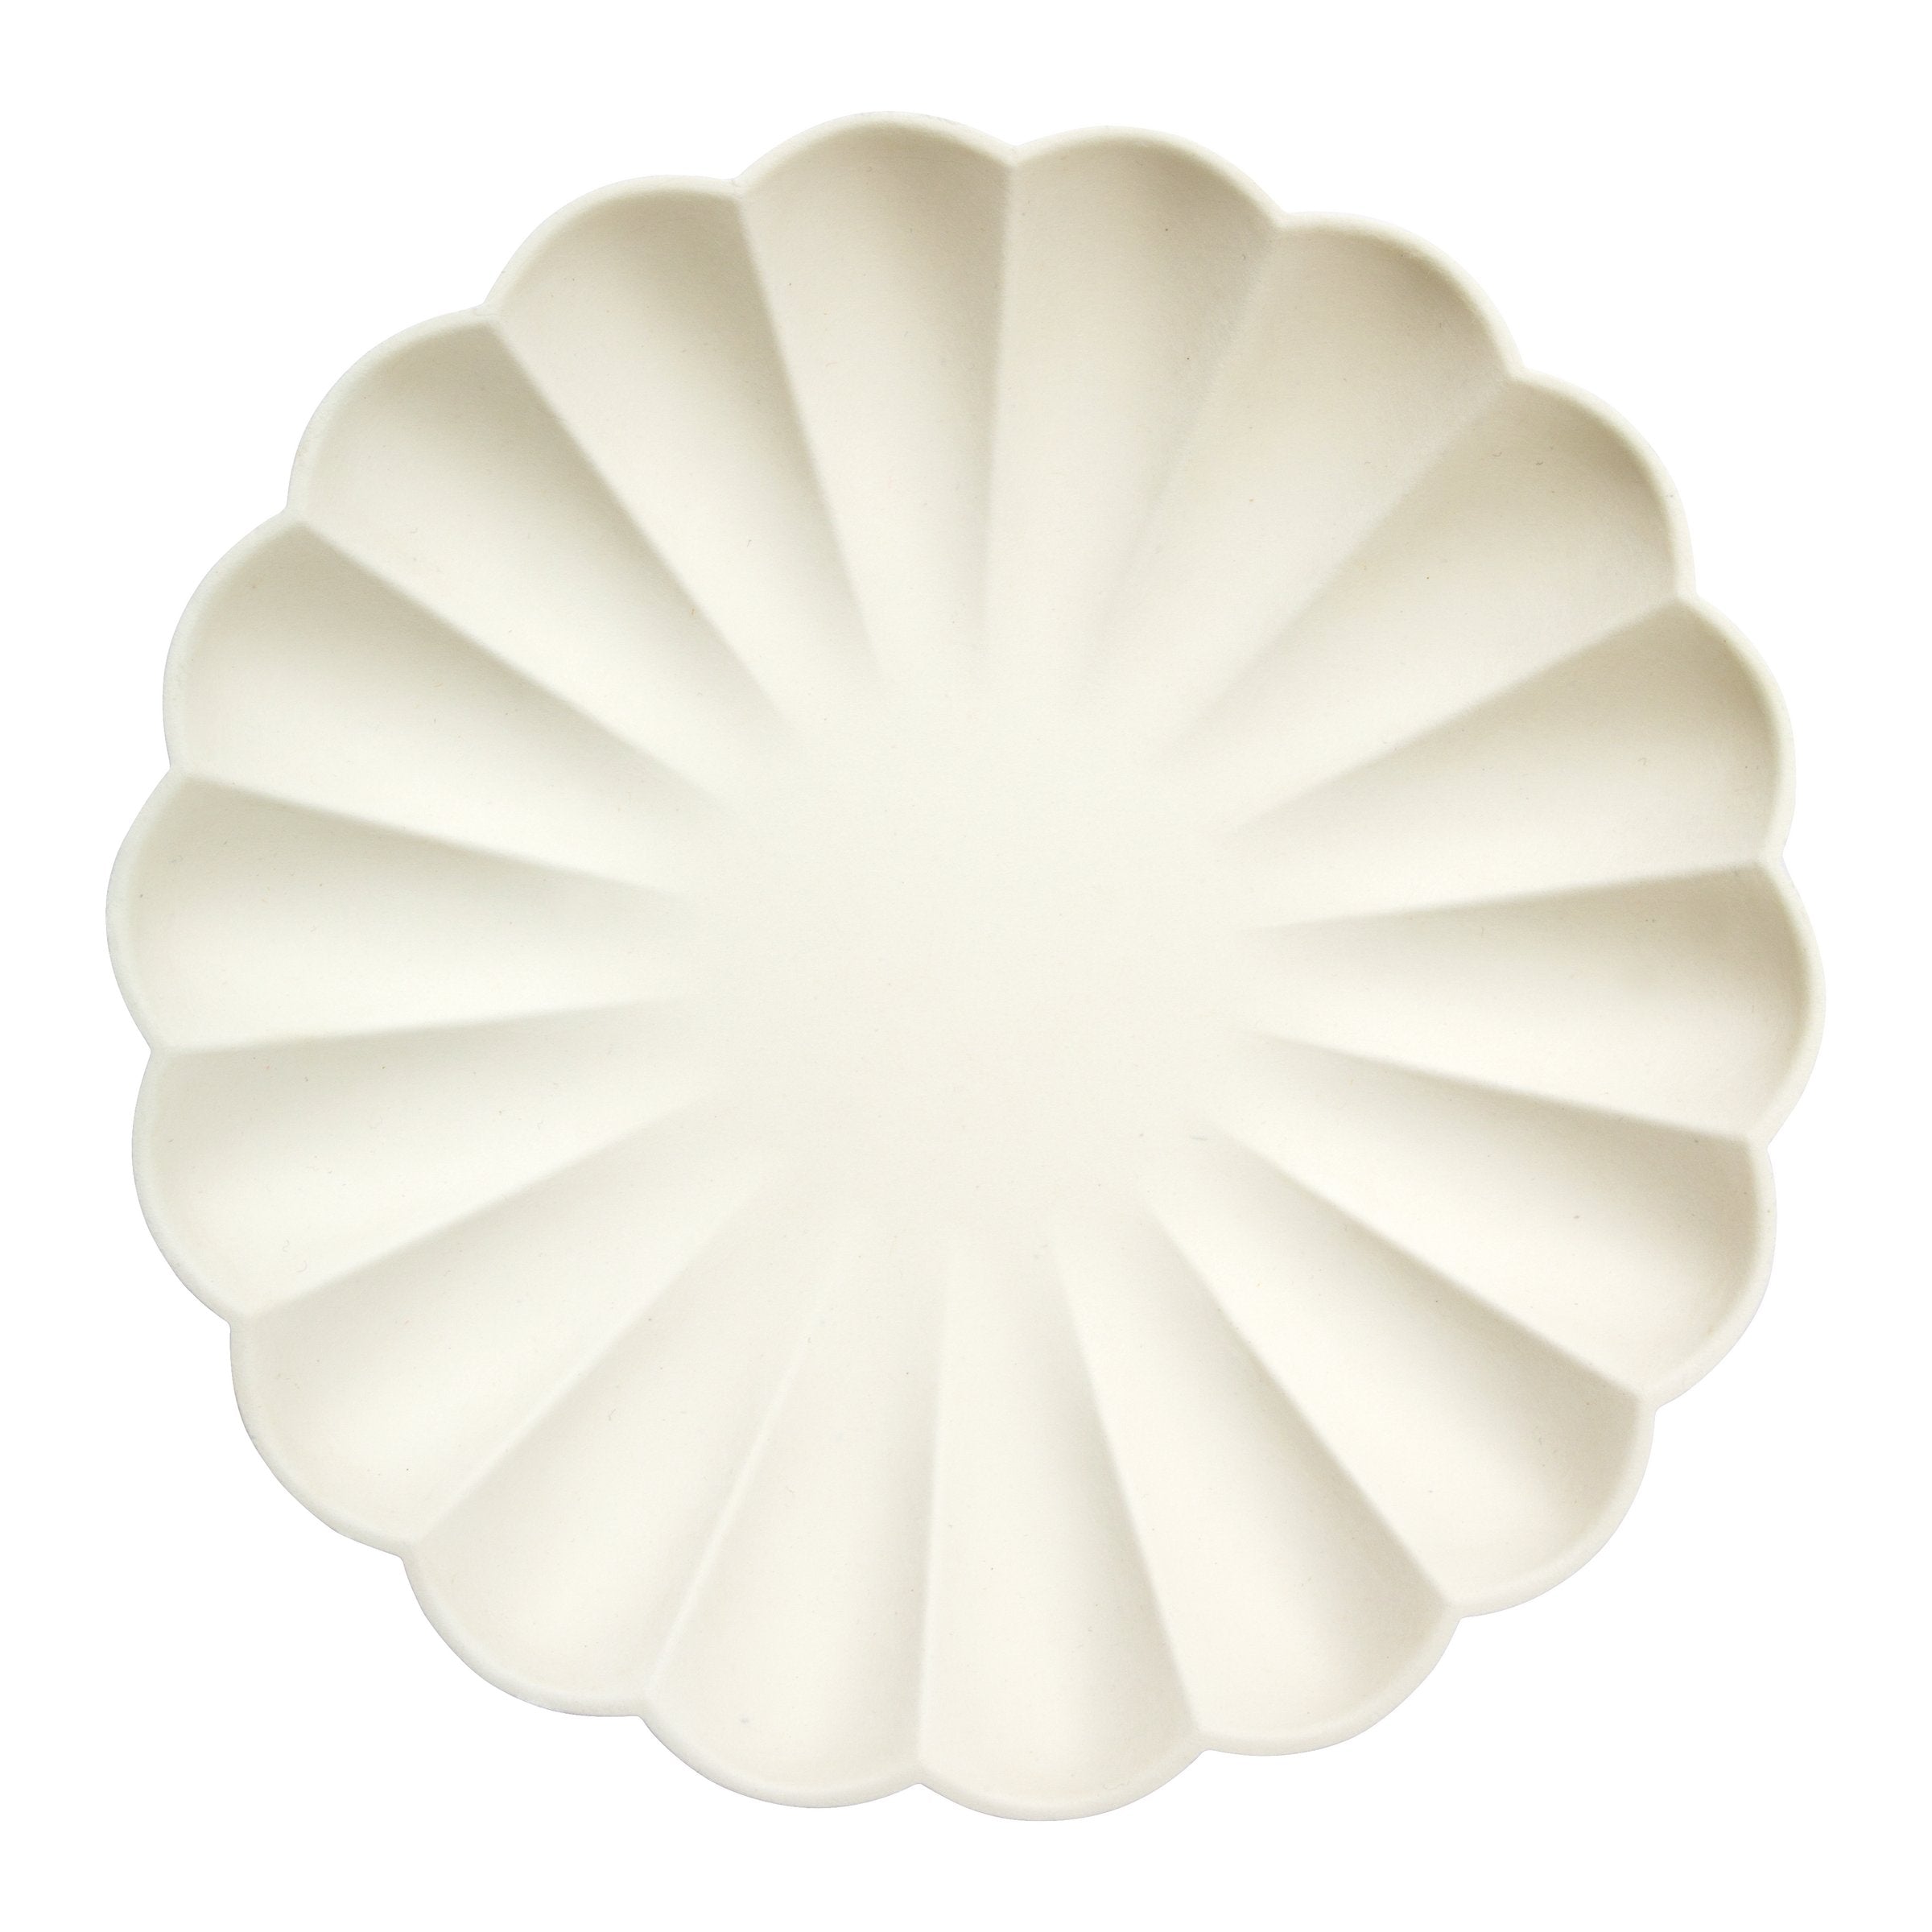 Large Cream Compostable Plates